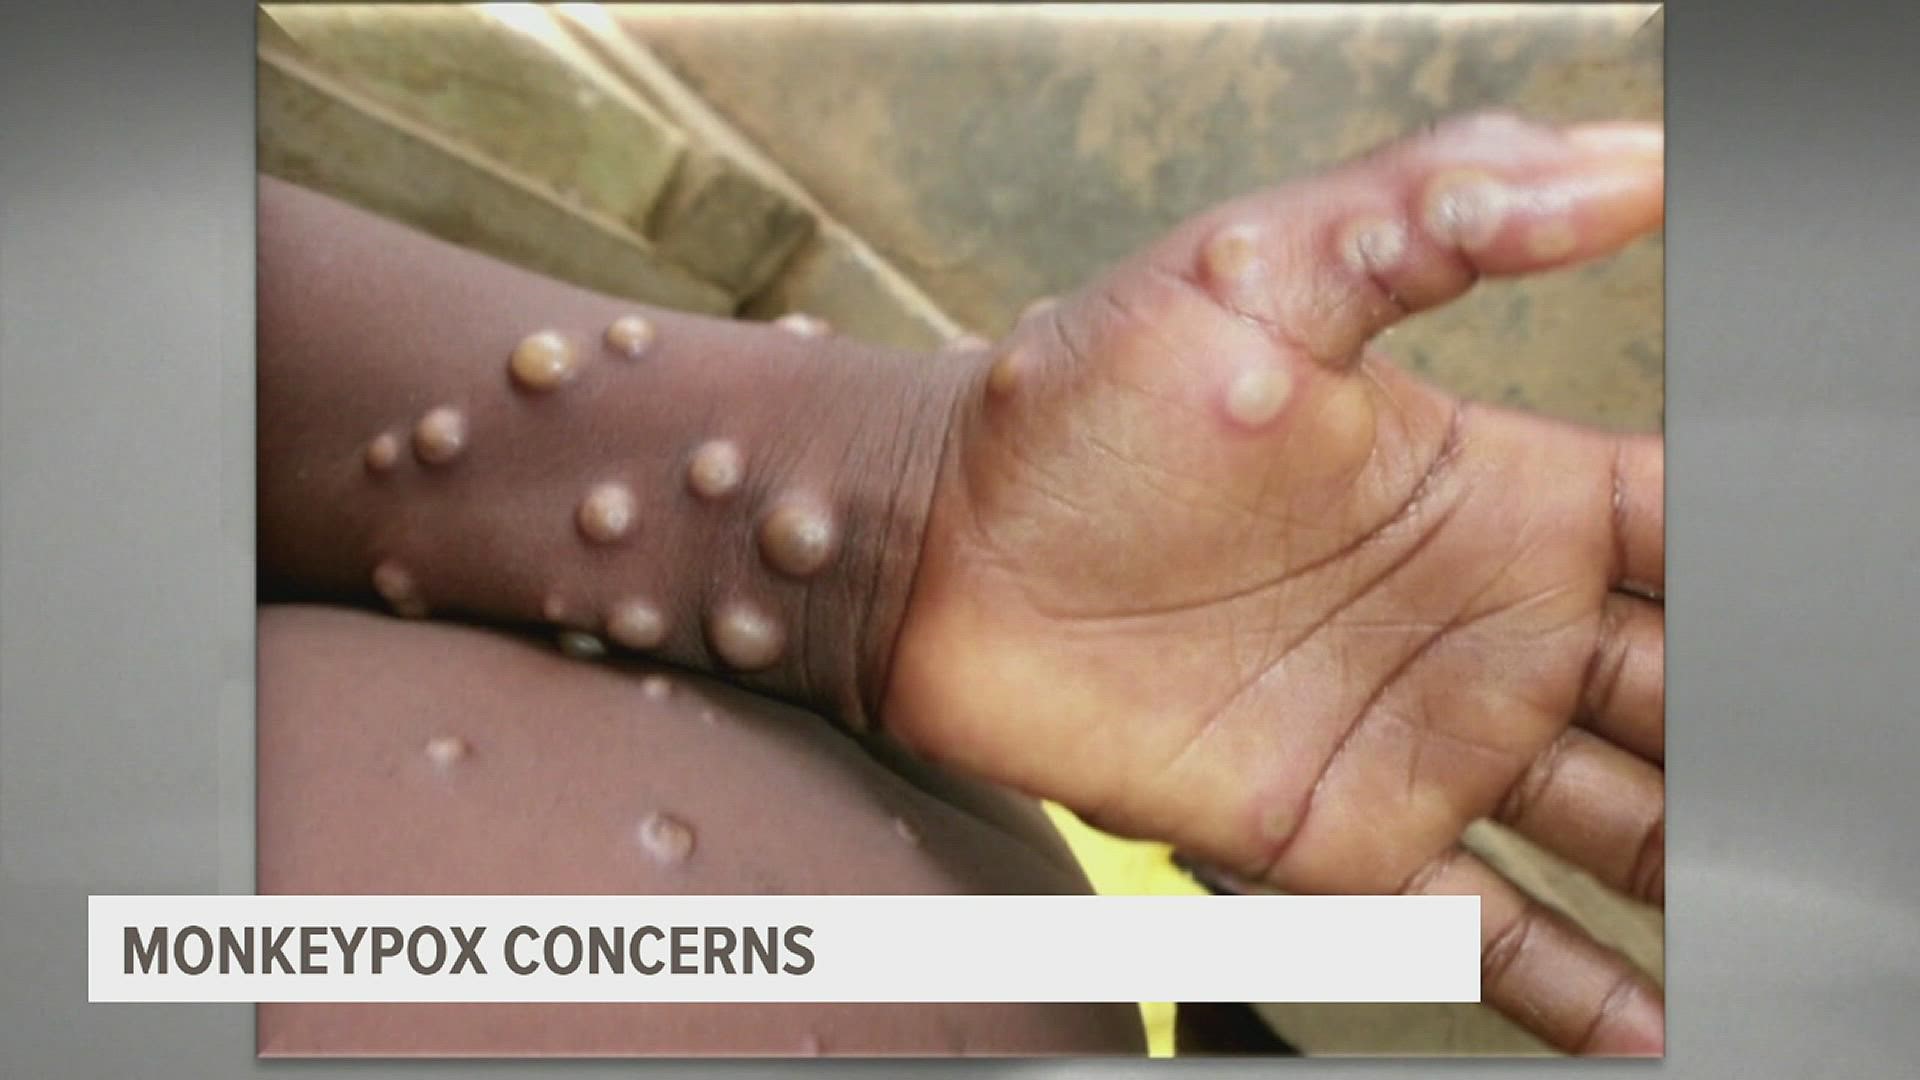 WHO estimates the disease is fatal for up to one in 10 people, but smallpox vaccines are protective and some antiviral drugs are being developed.